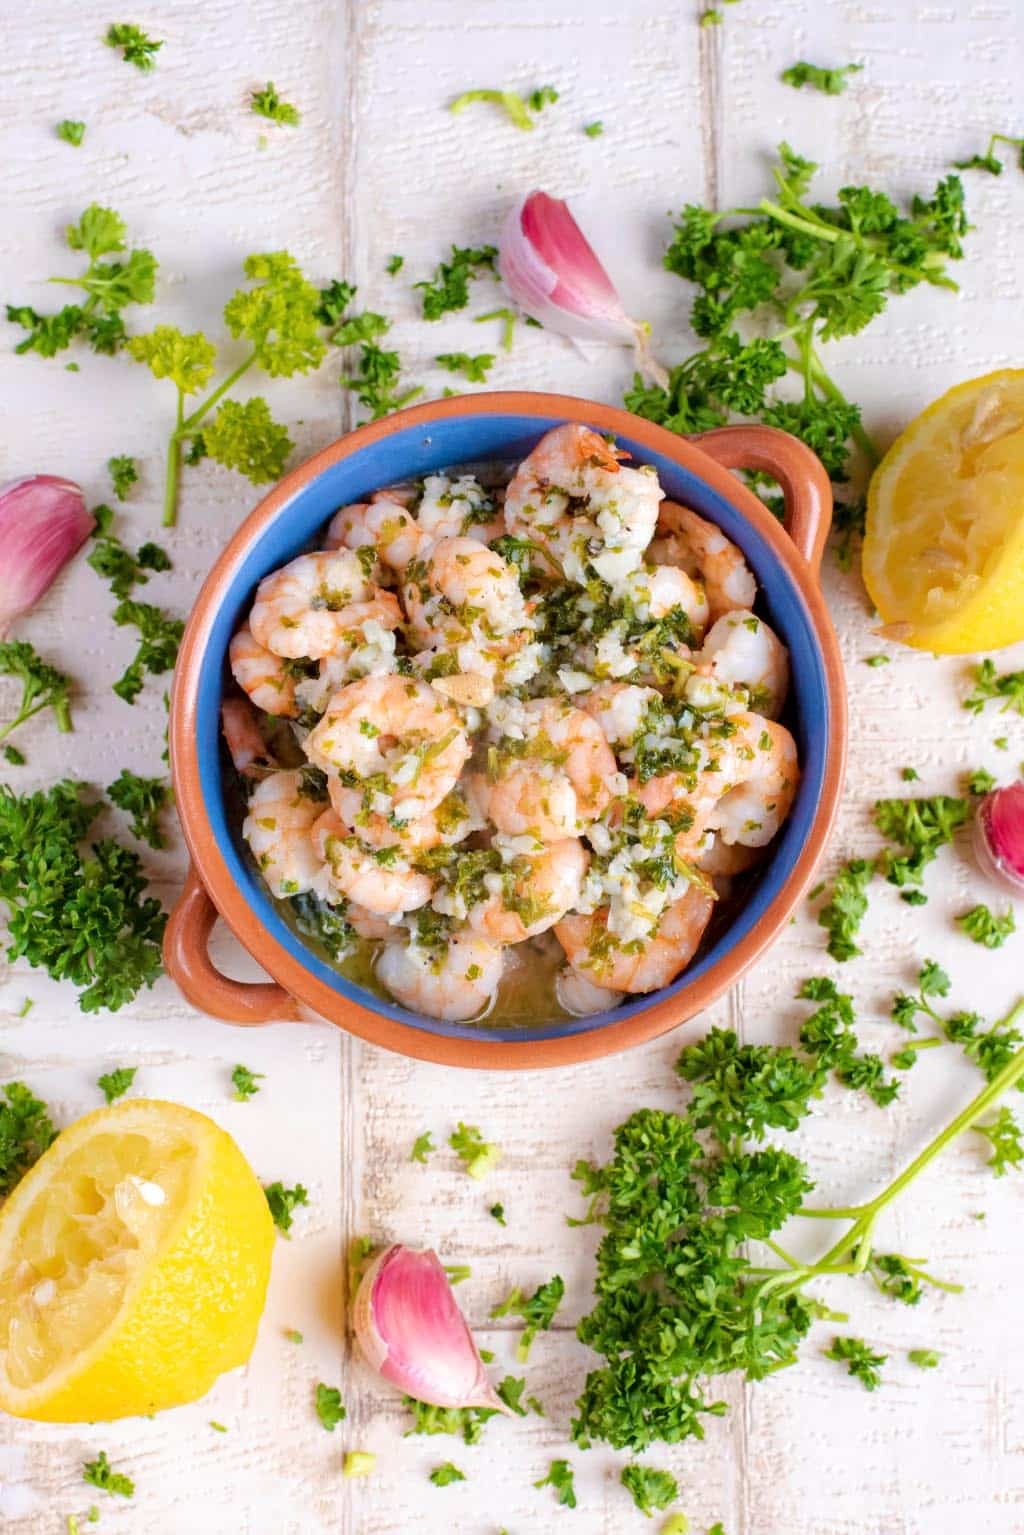 A bowl of cooked shrimp in garlic, herbs and oil, surrounded by parsley and lemon halves.